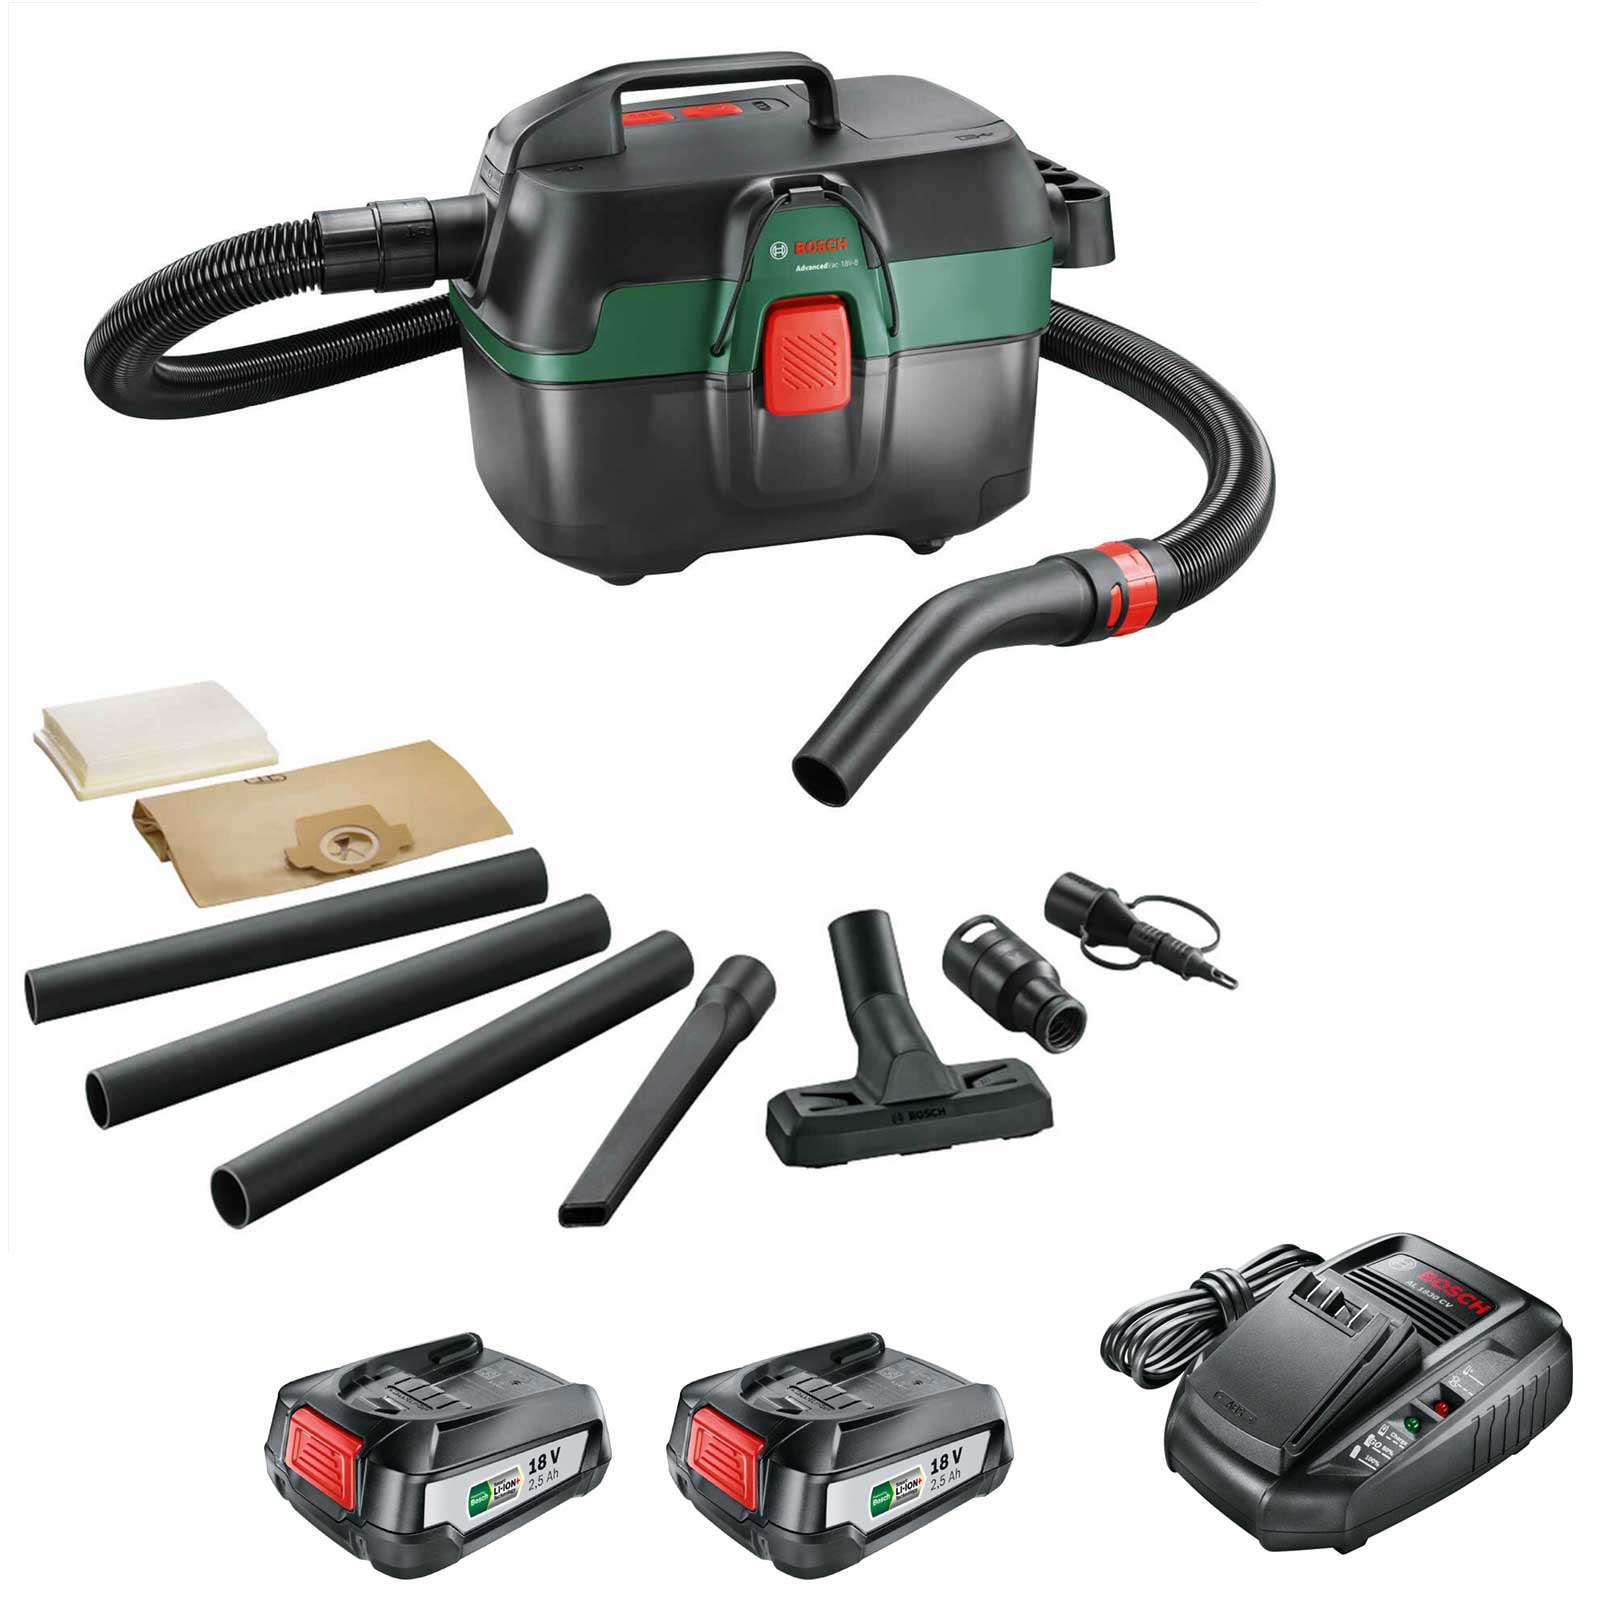 Image of Bosch ADVANCEDVAC 18V-8 18v Cordless Portable Wet and Dry Vacuum Cleaner 8L 2 x 2.5ah Li-ion Charger No Case